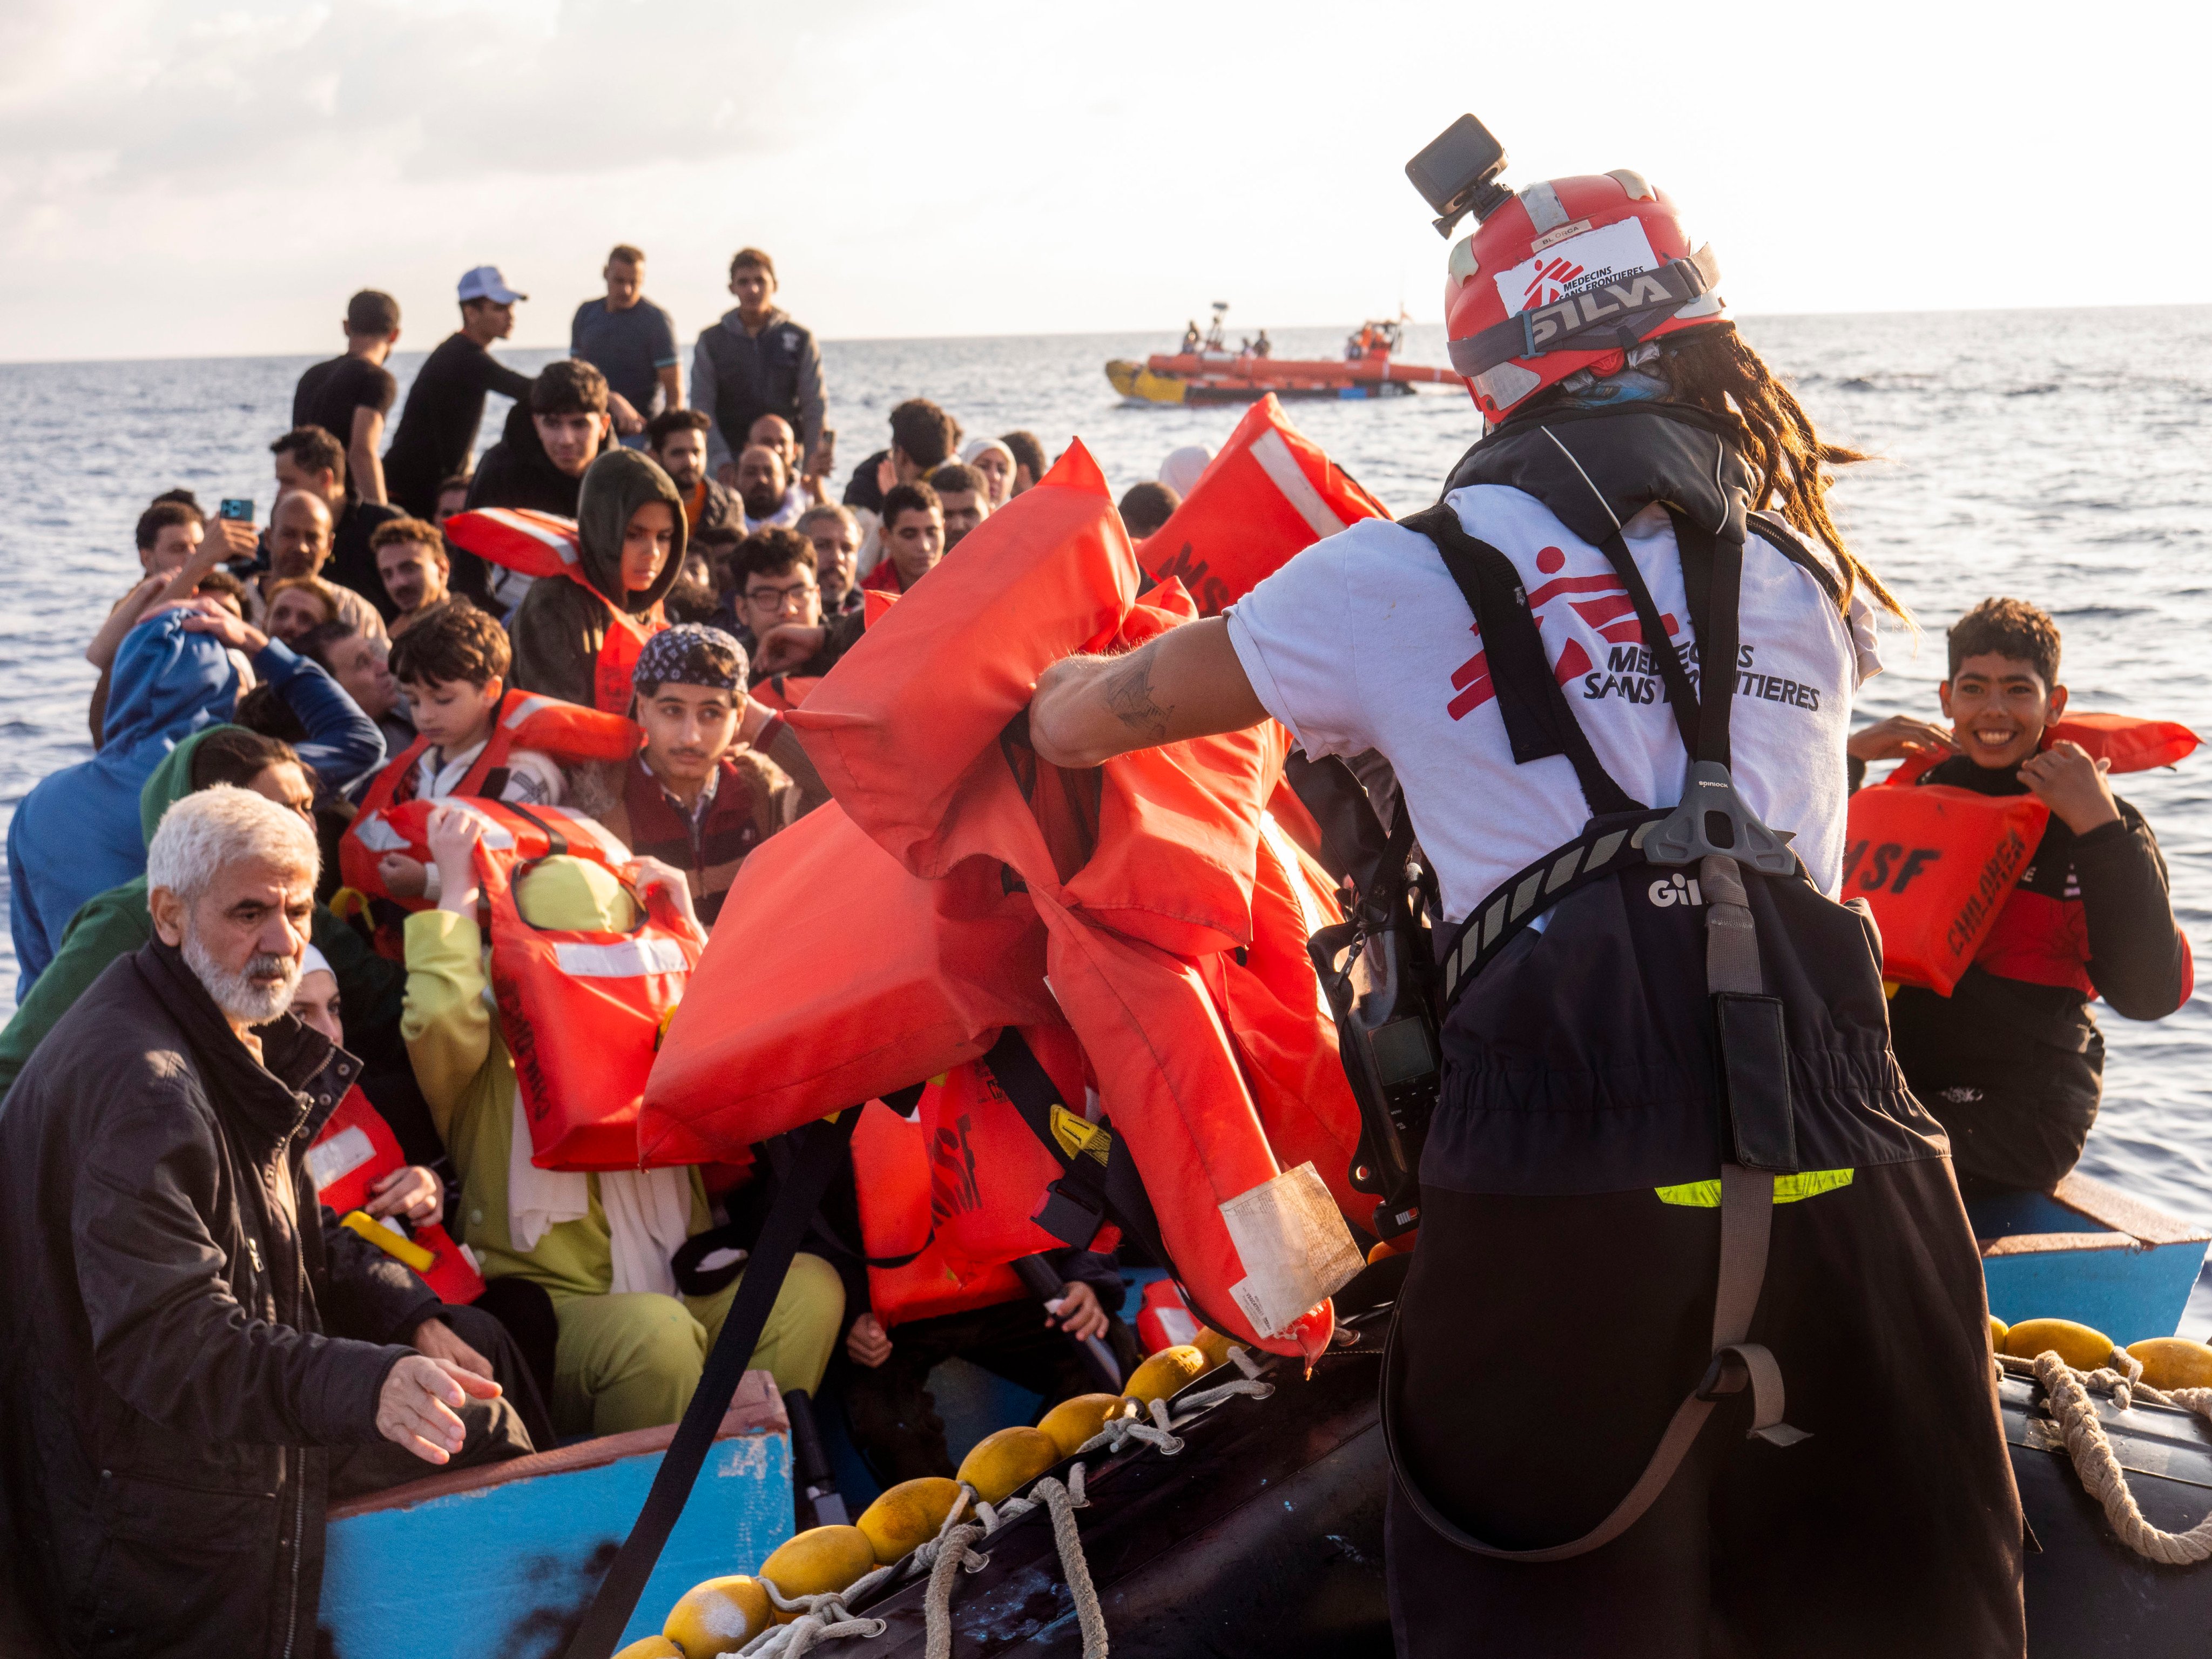 Migrants are rescued off the coast of Libya in October. Libya and Tunisia are principal departure points for migrants risking dangerous sea voyages in hopes of reaching Europe. Photo: AP